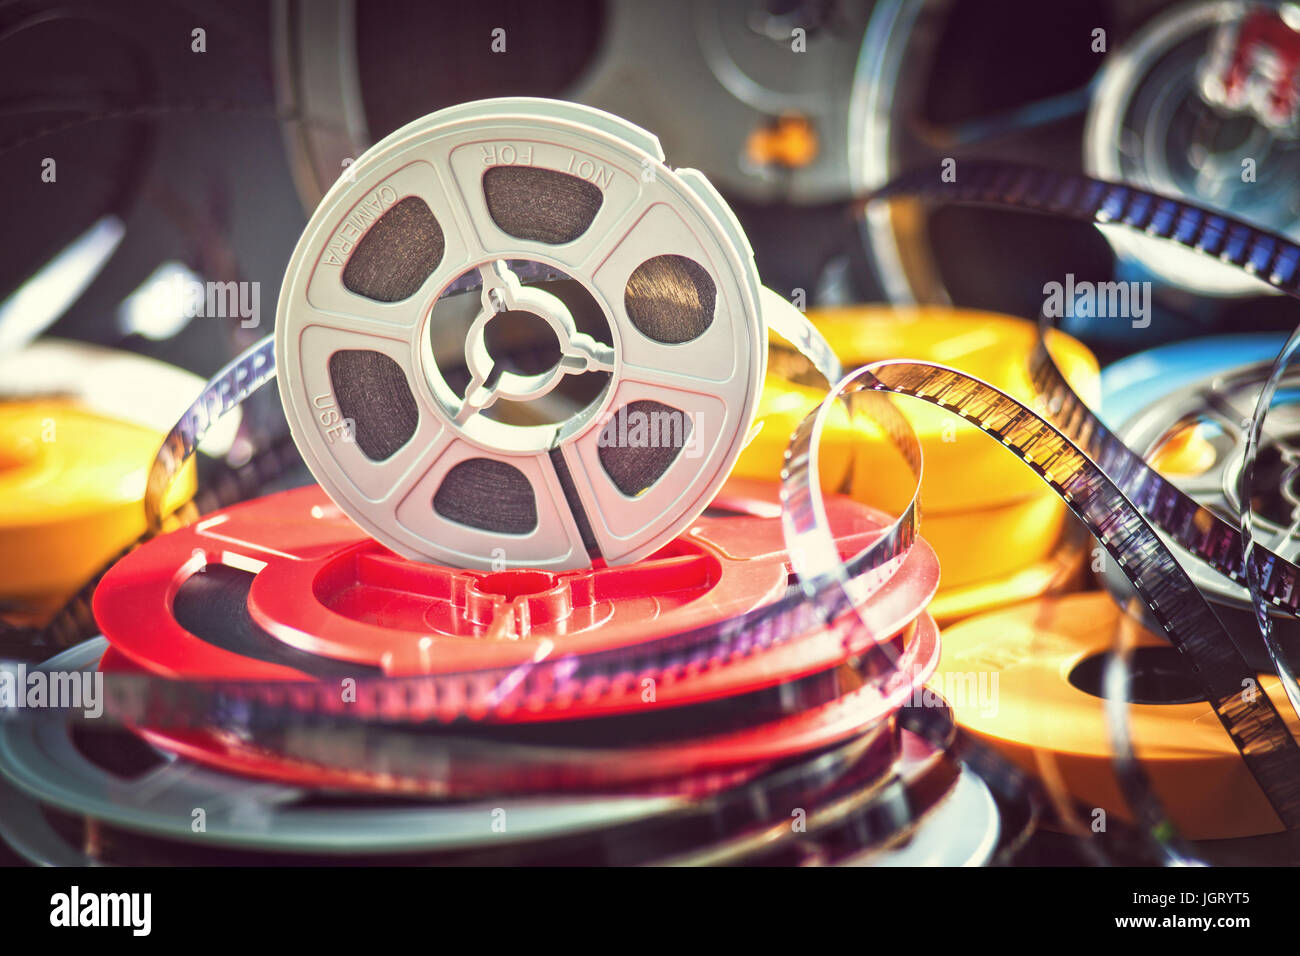 vintage 8mm film concept of movie industry Stock Photo